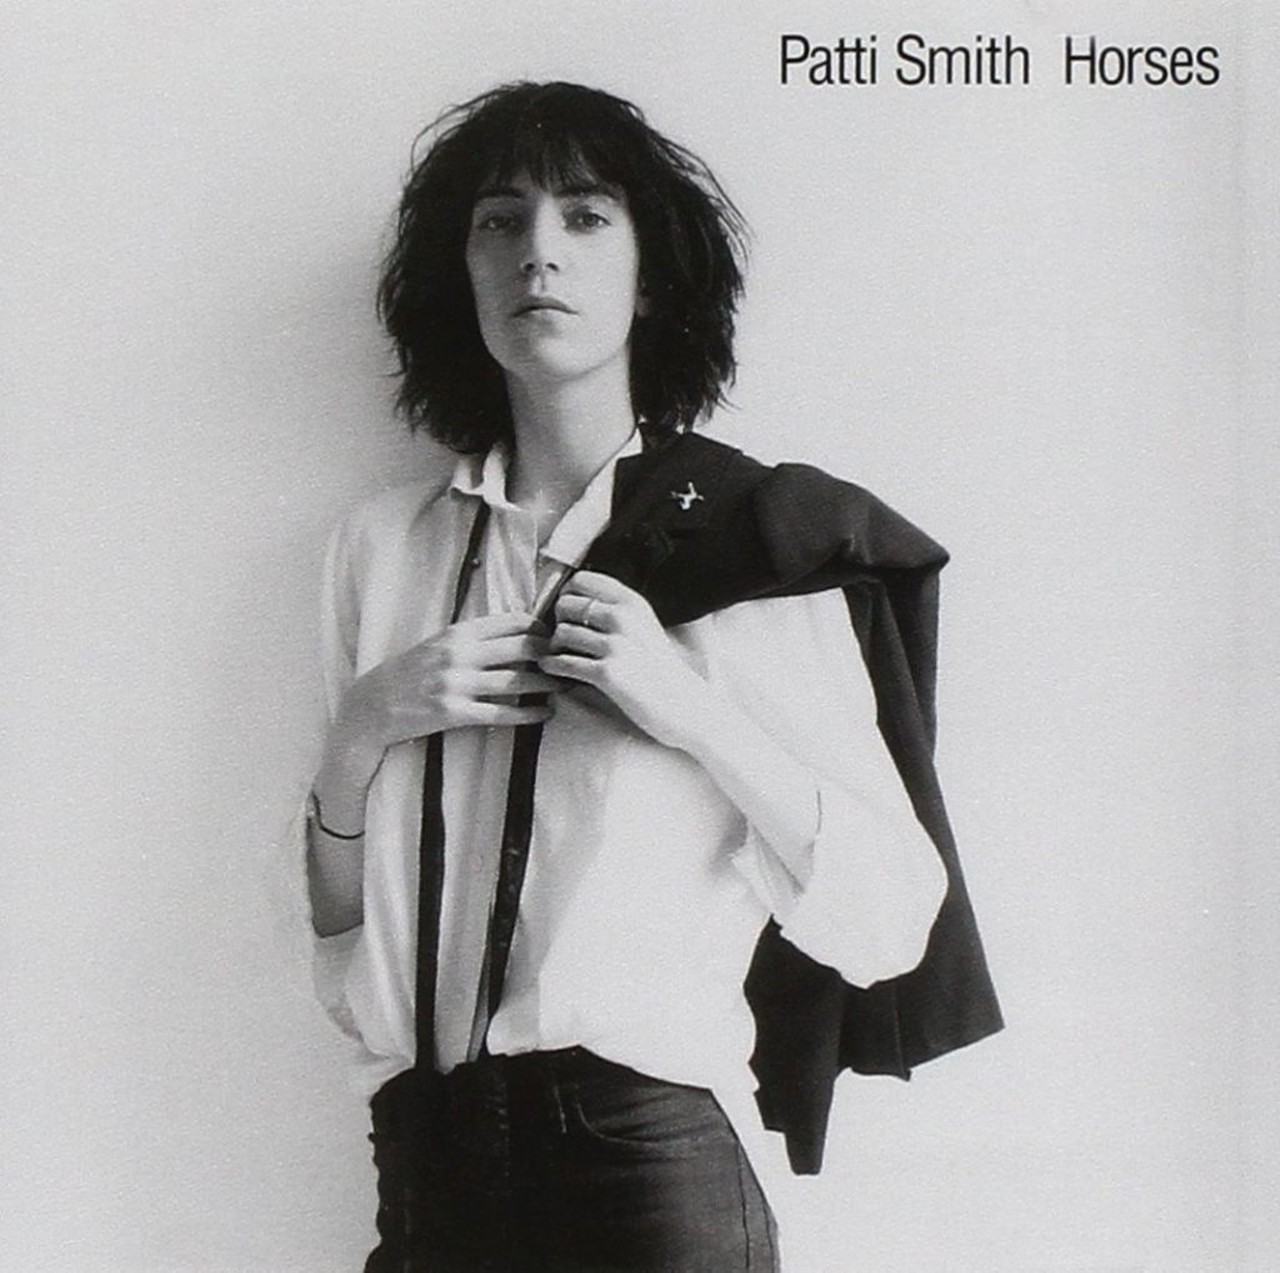 Patti Smith - Horses Live Electric Lady Studios 
Also another official RSD release, see if the classic LP from the female torchbearer of Dylan&#146;s poeticism and surrealist content lives up to the hype or if Crass was right in stating in anti-pop anthem &#147;Punk is Dead&#148;: Patti Smith, you&#146;re napalm, you write with your hand but it&#146;s Rimbaud&#146;s arm.&#148;
Via amazon.com